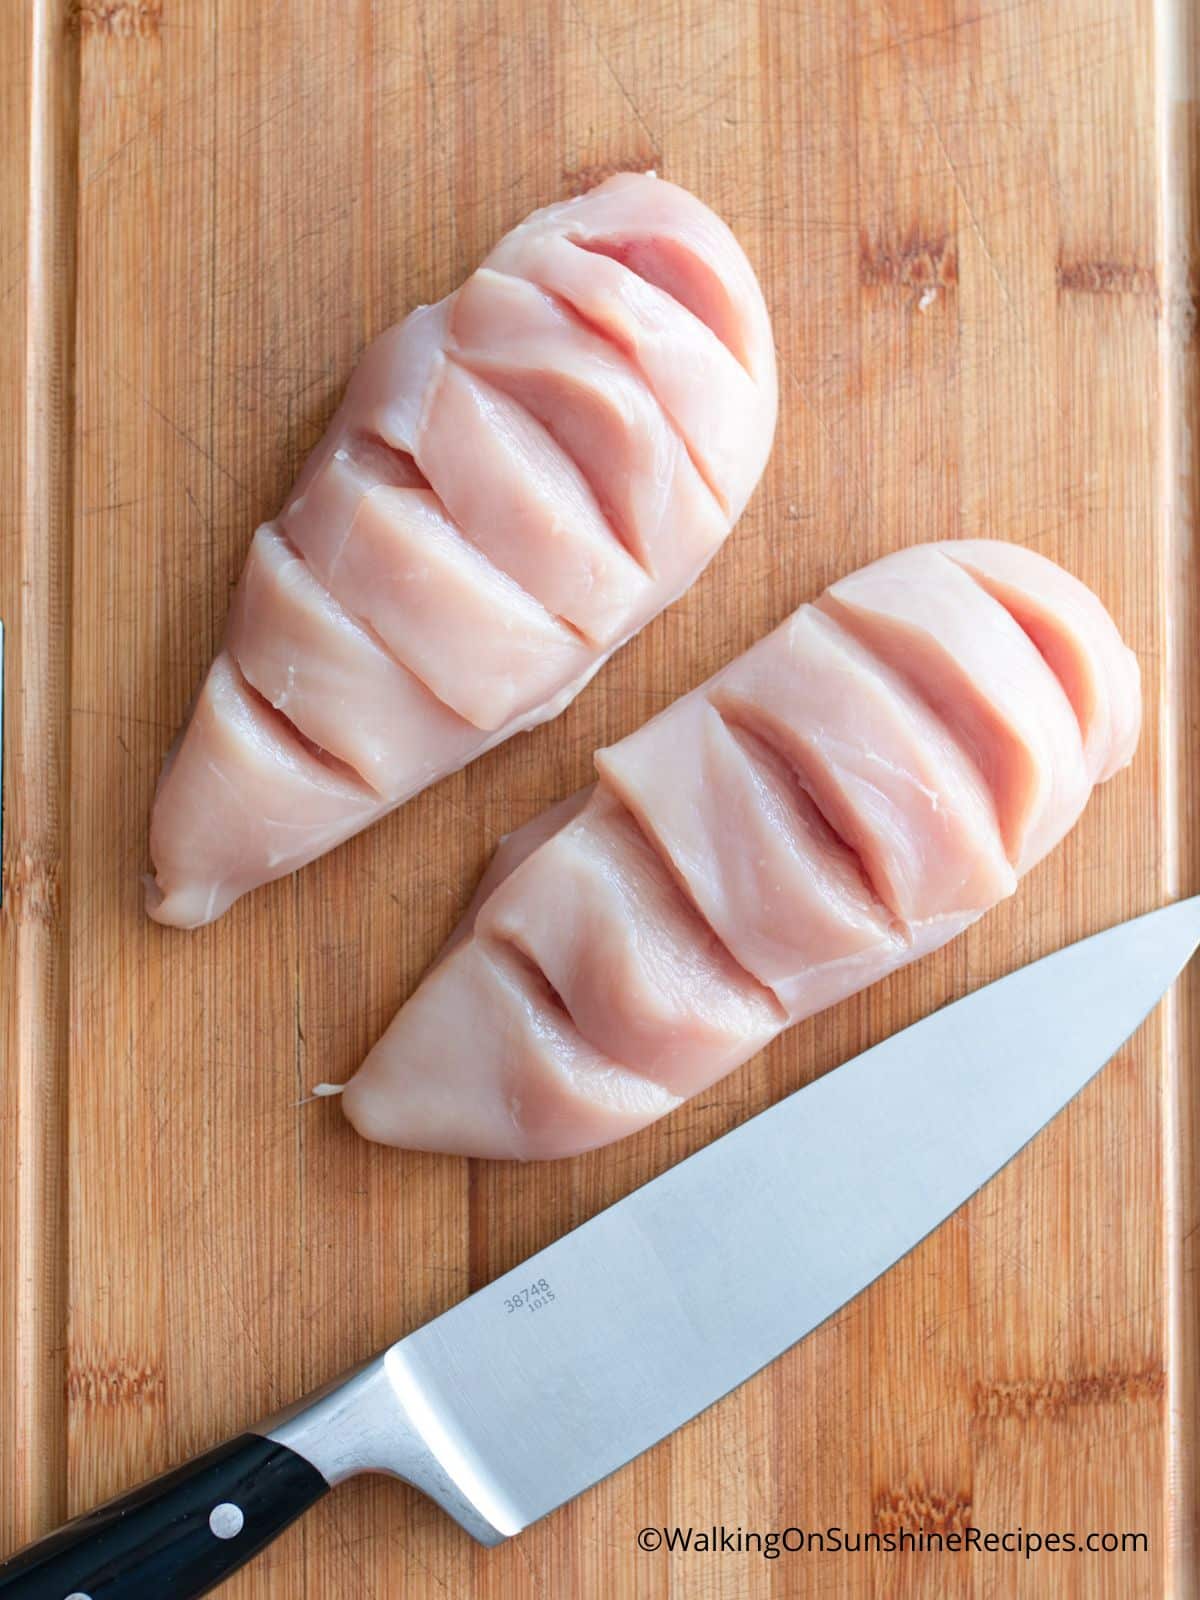 How to make slits in chicken for Hasselback Chicken.